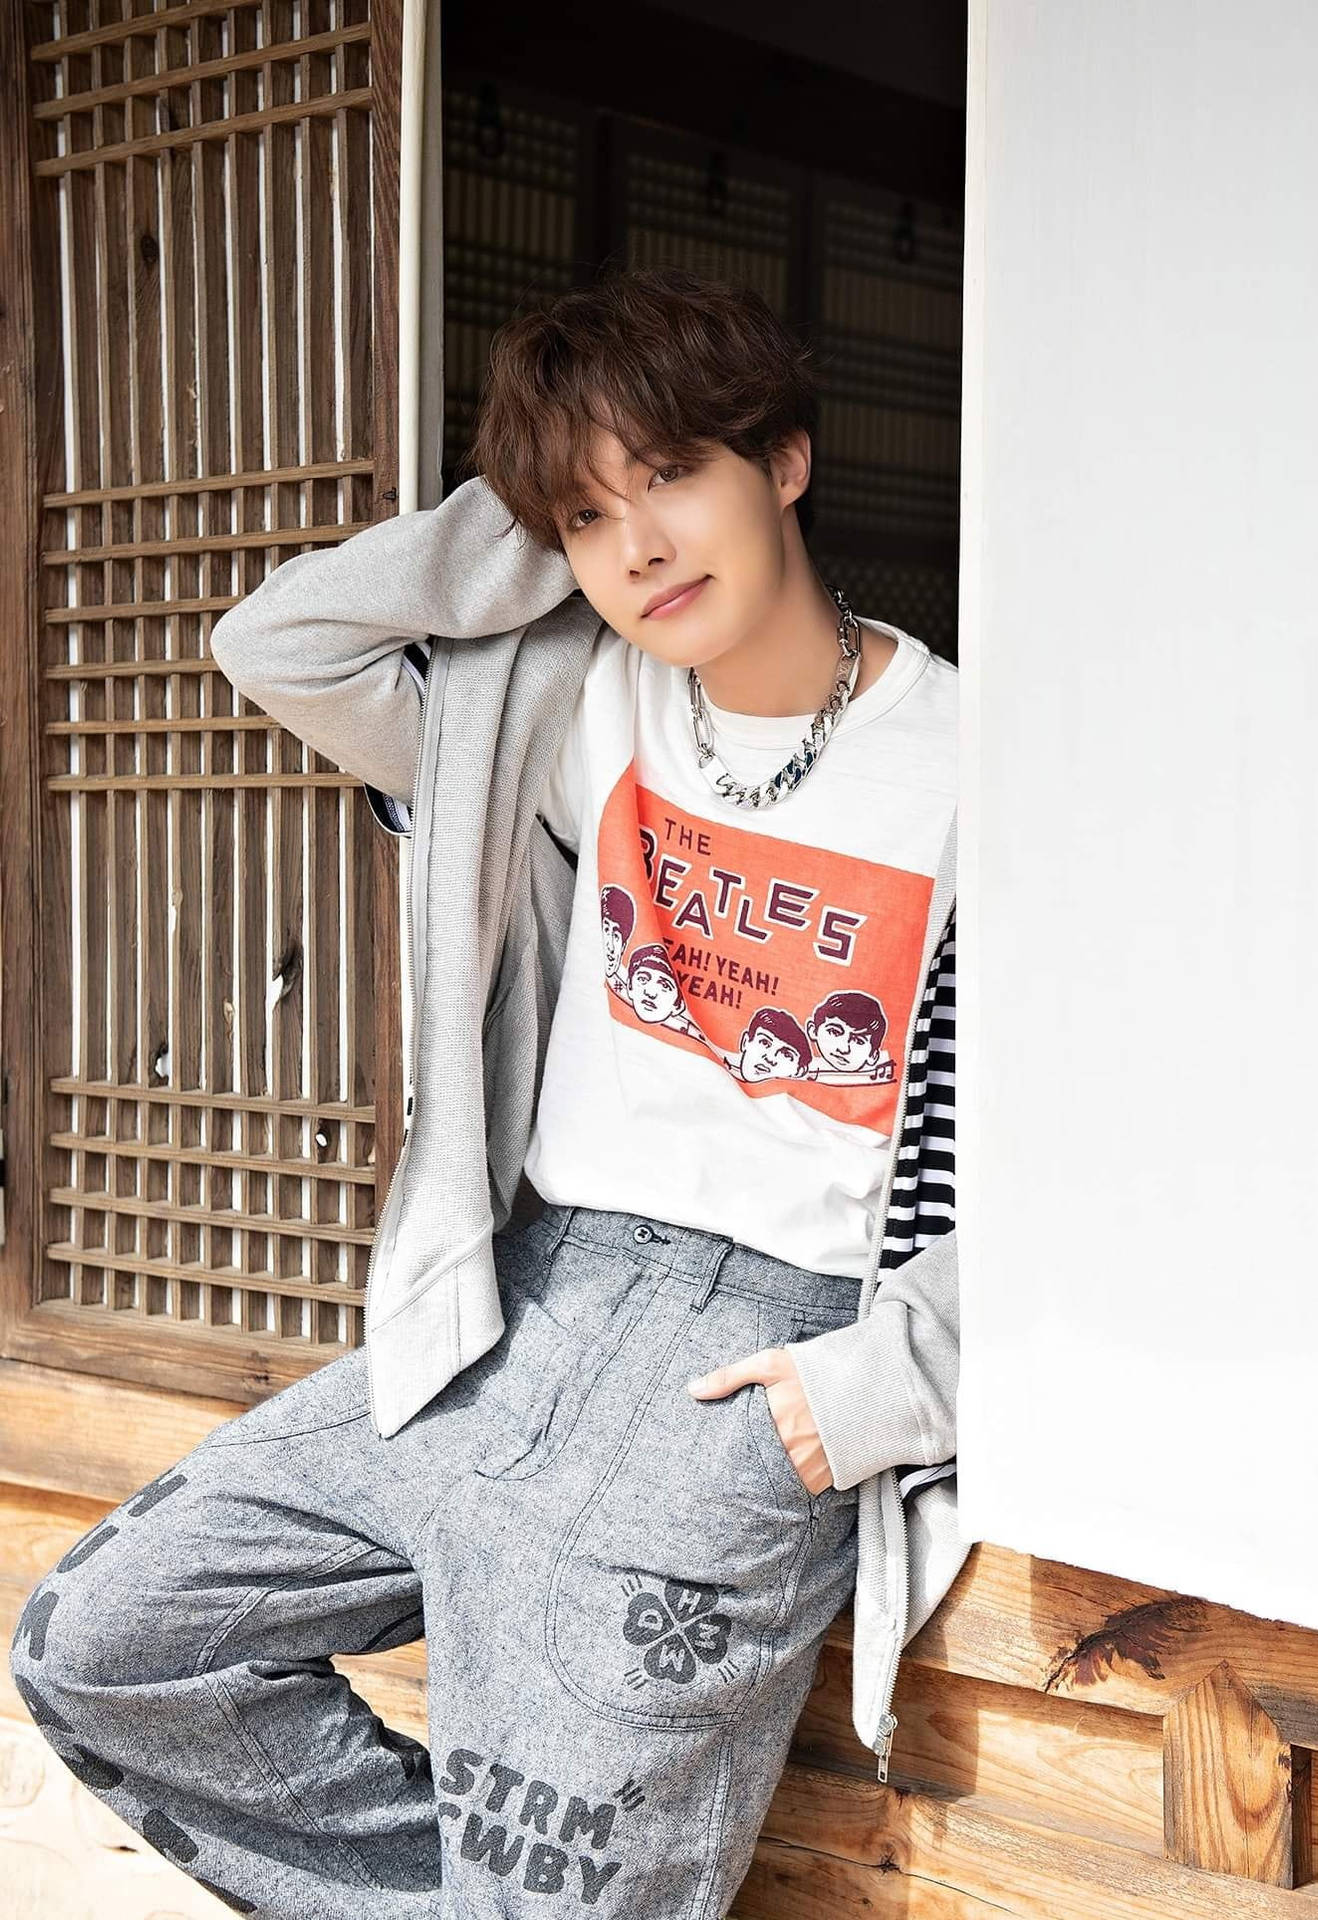 JHope Cute With Casual Outfit Wallpaper